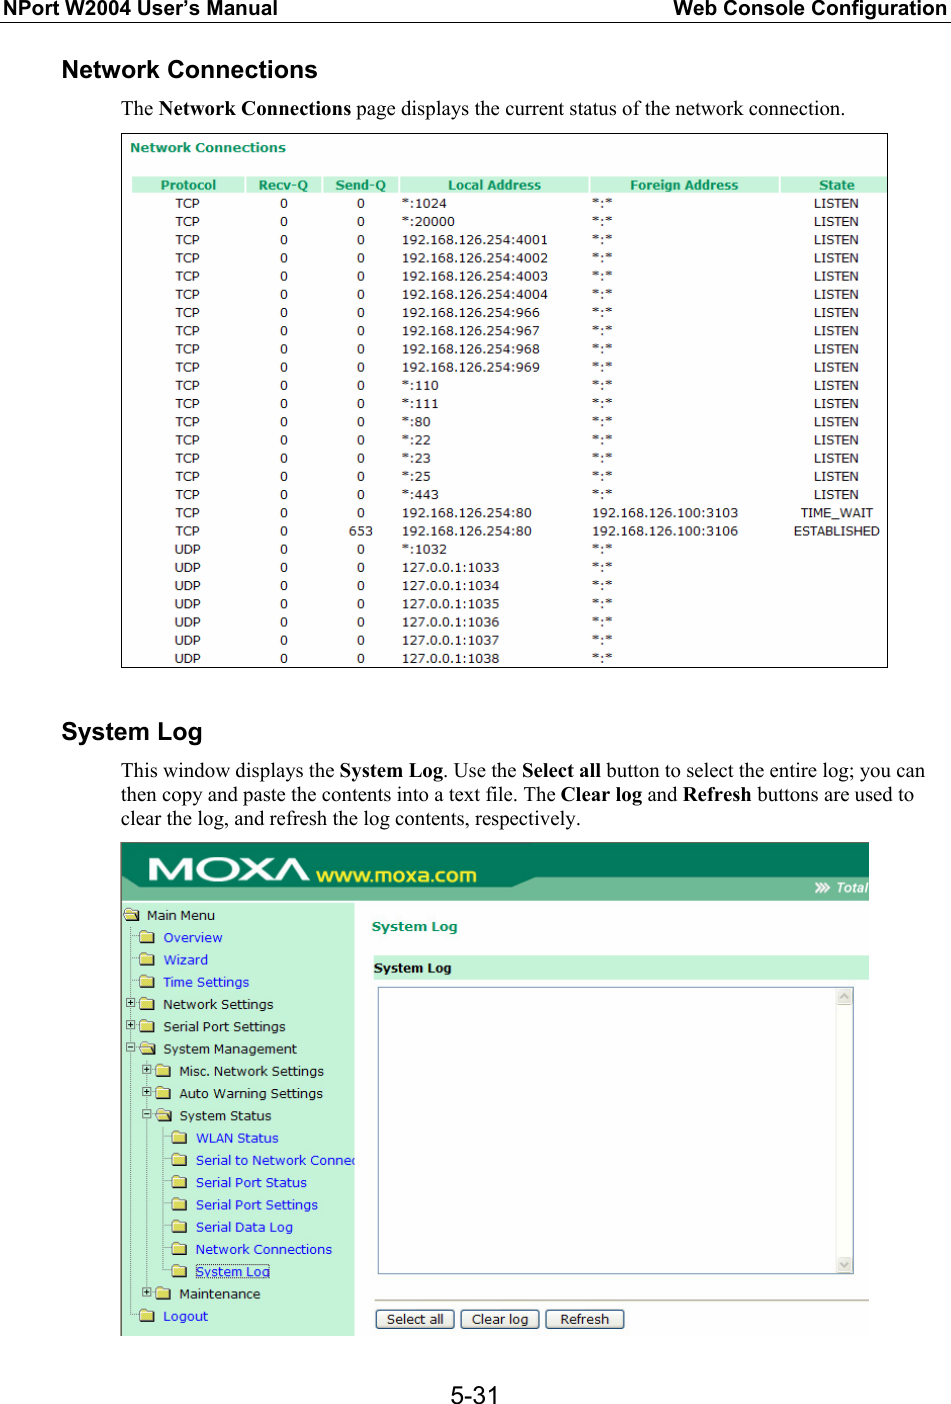 NPort W2004 User’s Manual  Web Console Configuration  5-31Network Connections The Network Connections page displays the current status of the network connection.   System Log This window displays the System Log. Use the Select all button to select the entire log; you can then copy and paste the contents into a text file. The Clear log and Refresh buttons are used to clear the log, and refresh the log contents, respectively.  